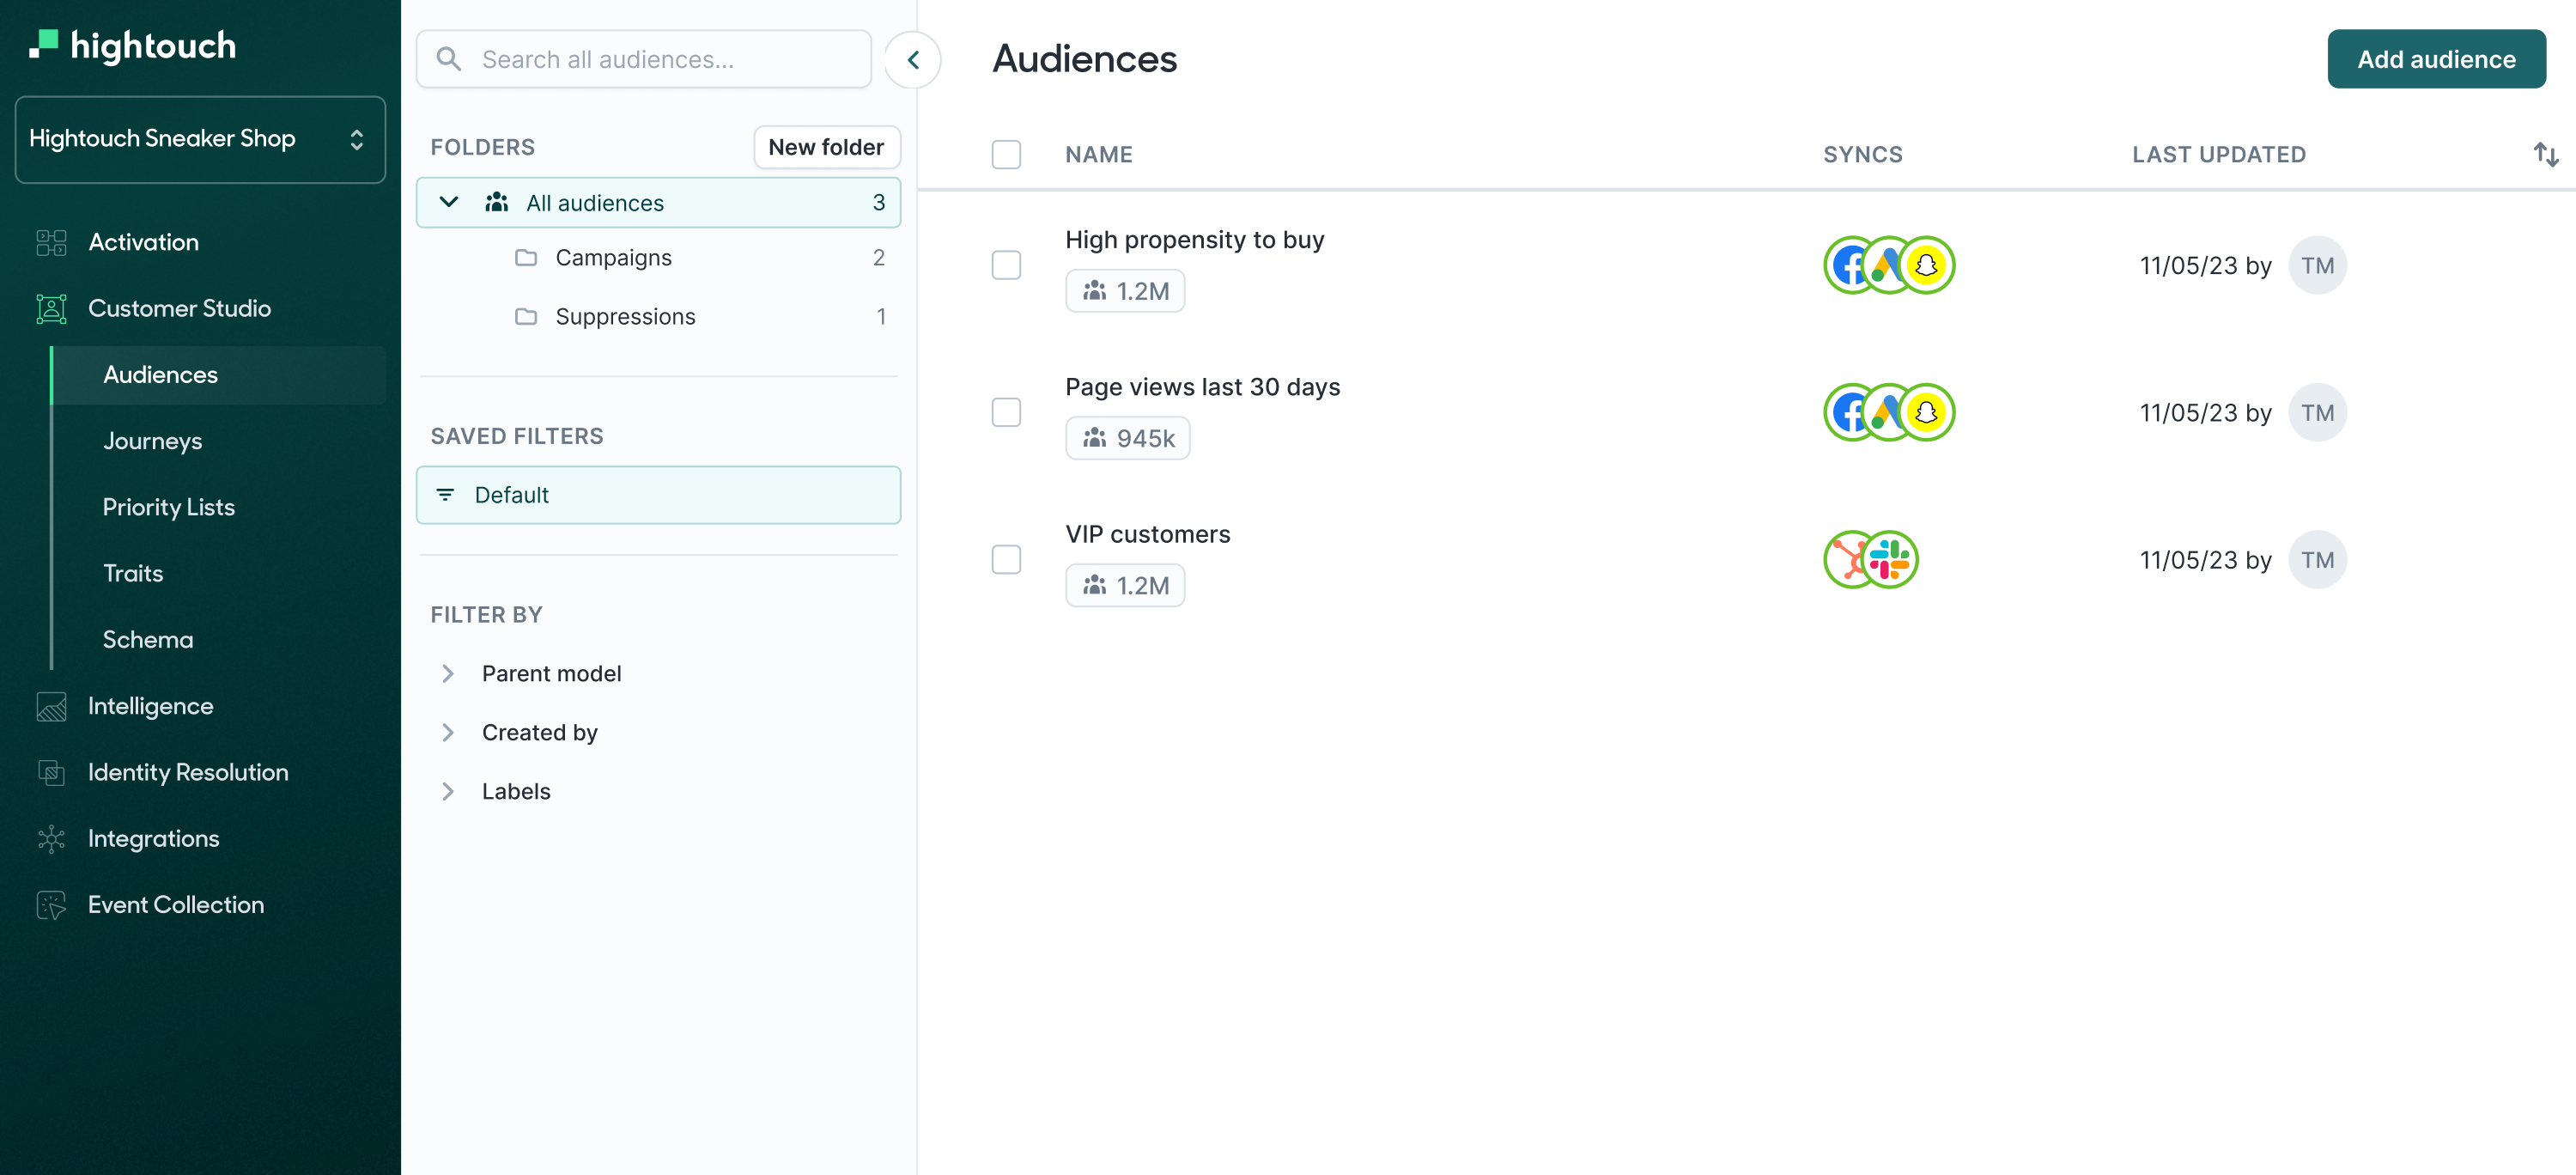 Hightouch Audiences user interface.